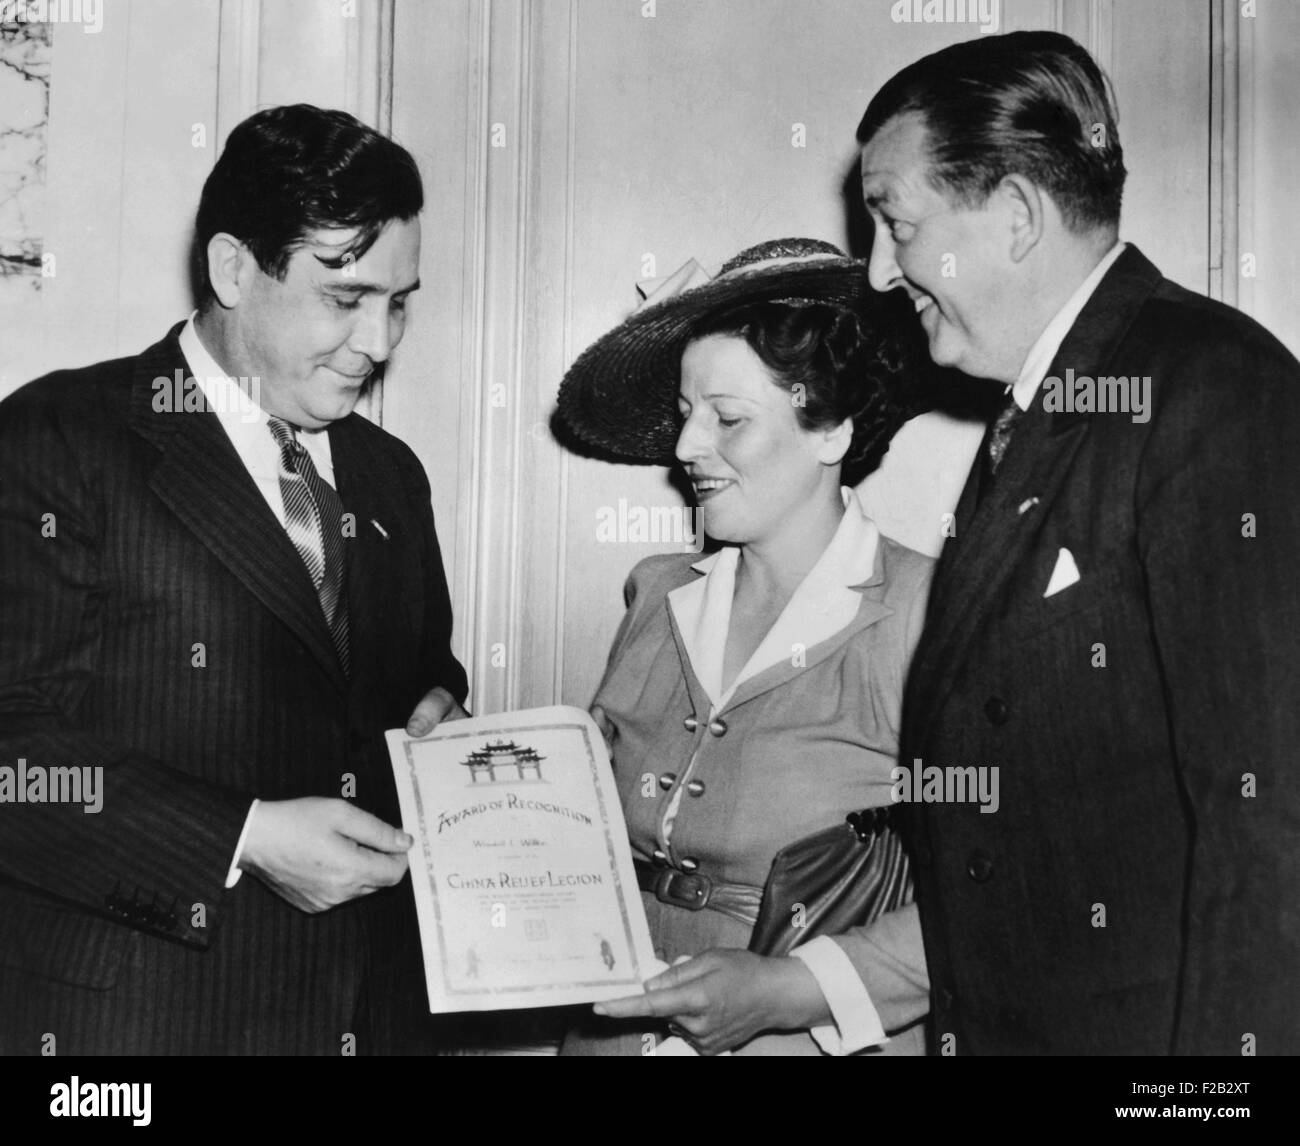 Author Pearl Buck presents Wendell Willkie with a United China Relief Fellowship Certificate. United China Relief was founded in 1941 in NYC to raise funds to aid the Chinese people during World War II. At right is James G. Blaine. (CSU 2015 8 473) Stock Photo